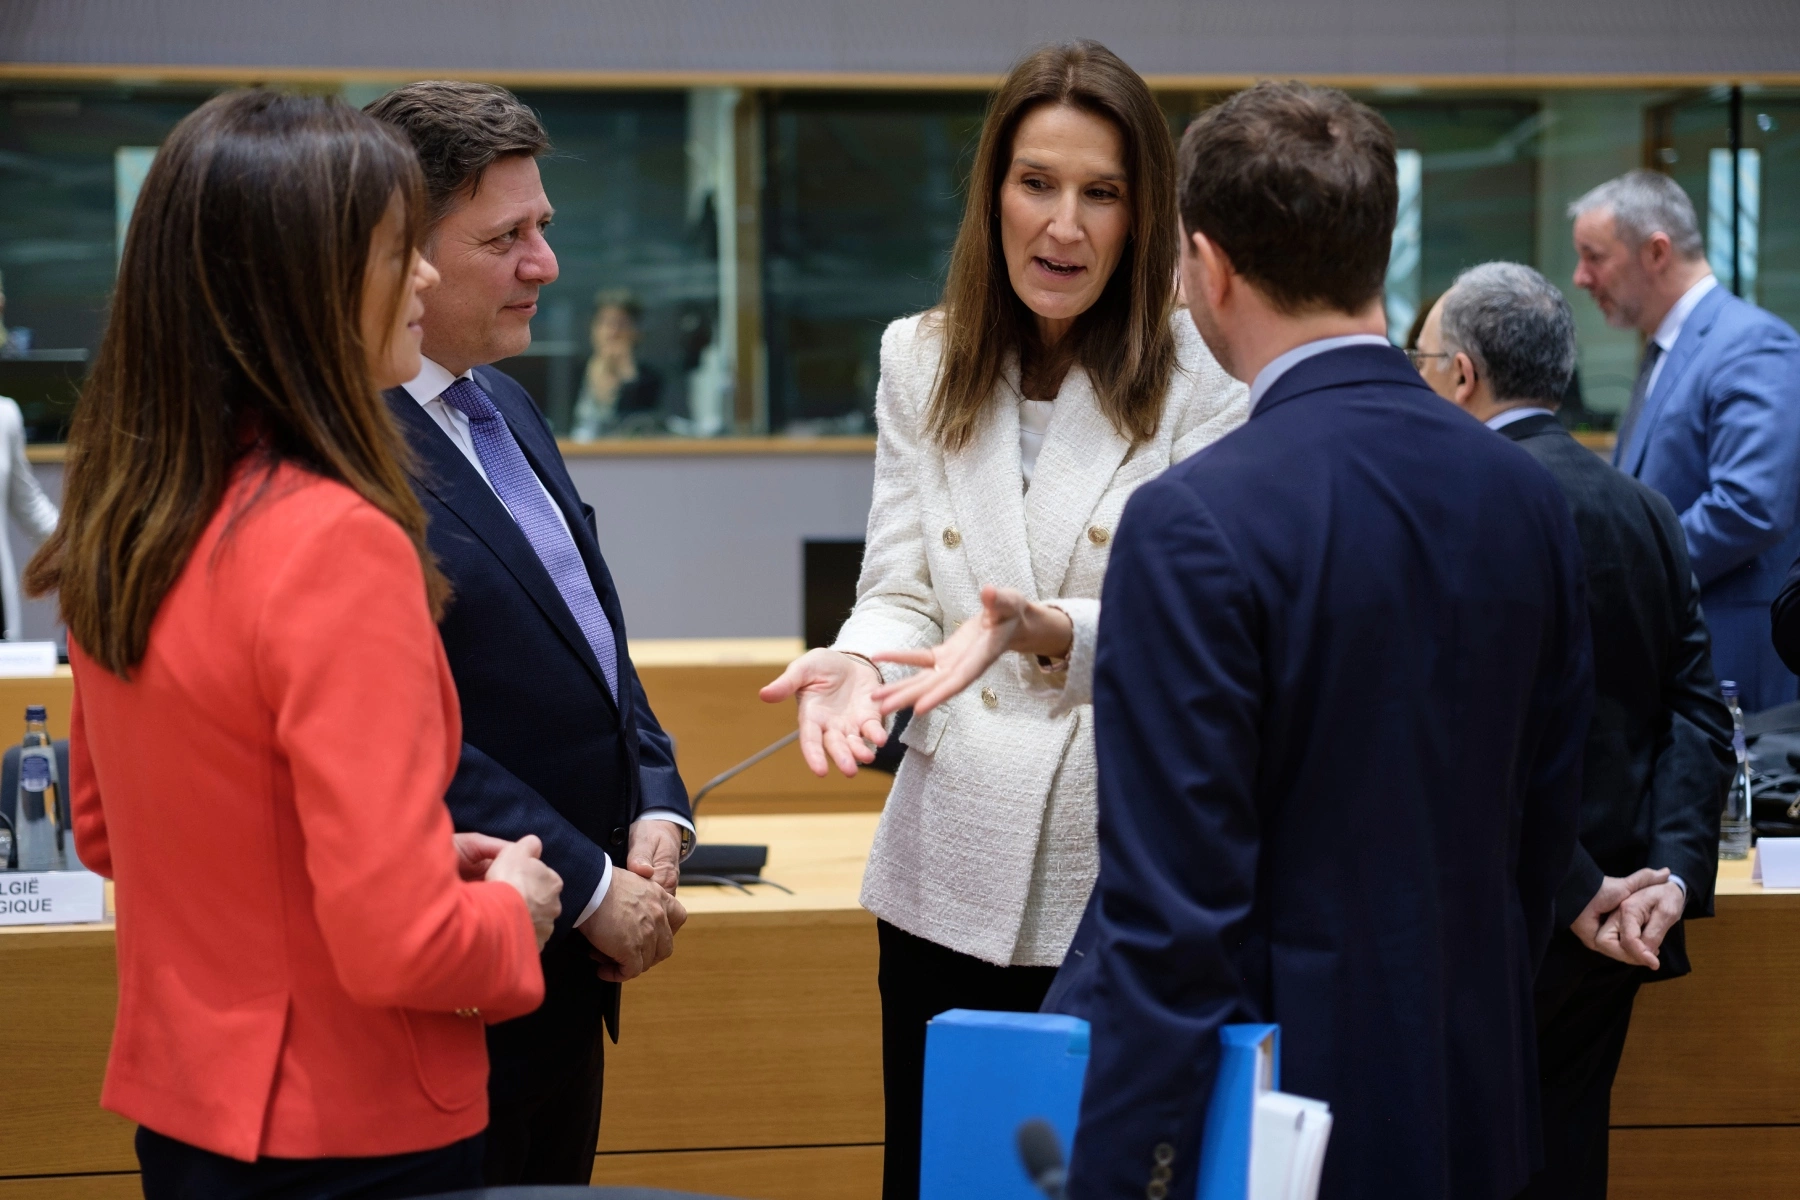 the former prime minister of Belgium, Sophie Wilmes, standing and chatting to three other politicians in the EU Council headquarter in March, 2022